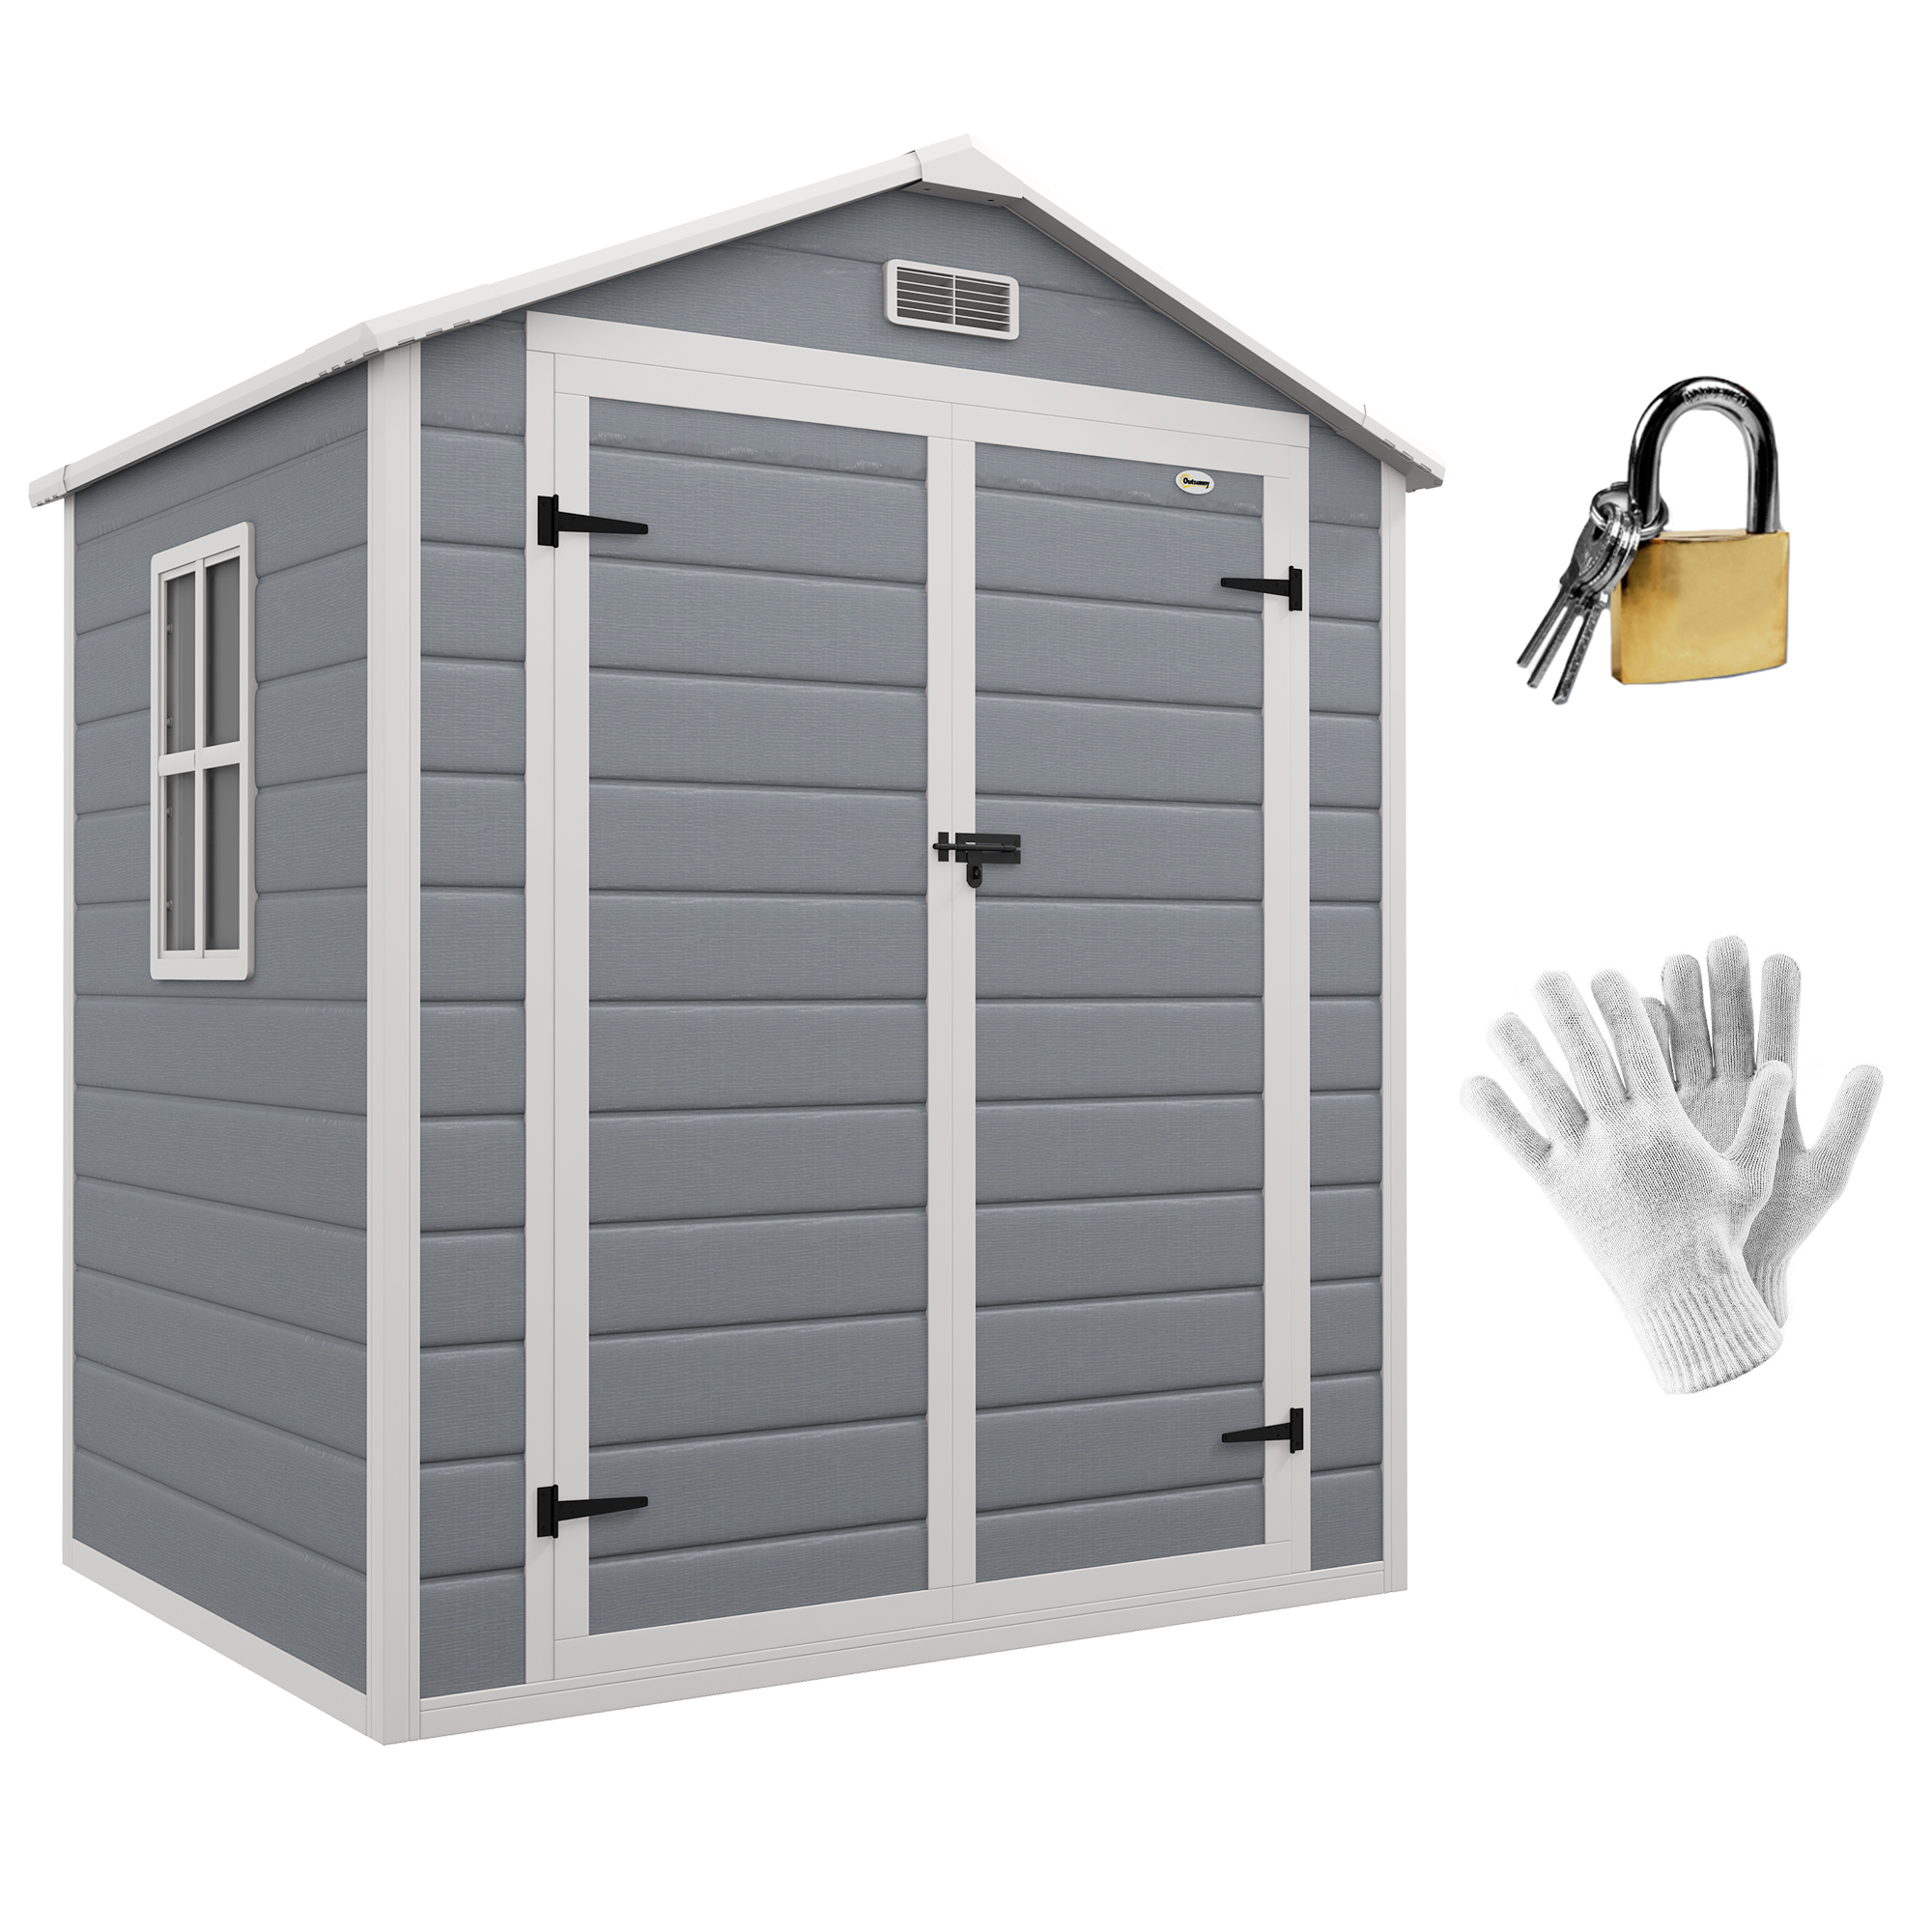 6' x 4.5' Lockable Outdoor Storage Shed with Double Doors